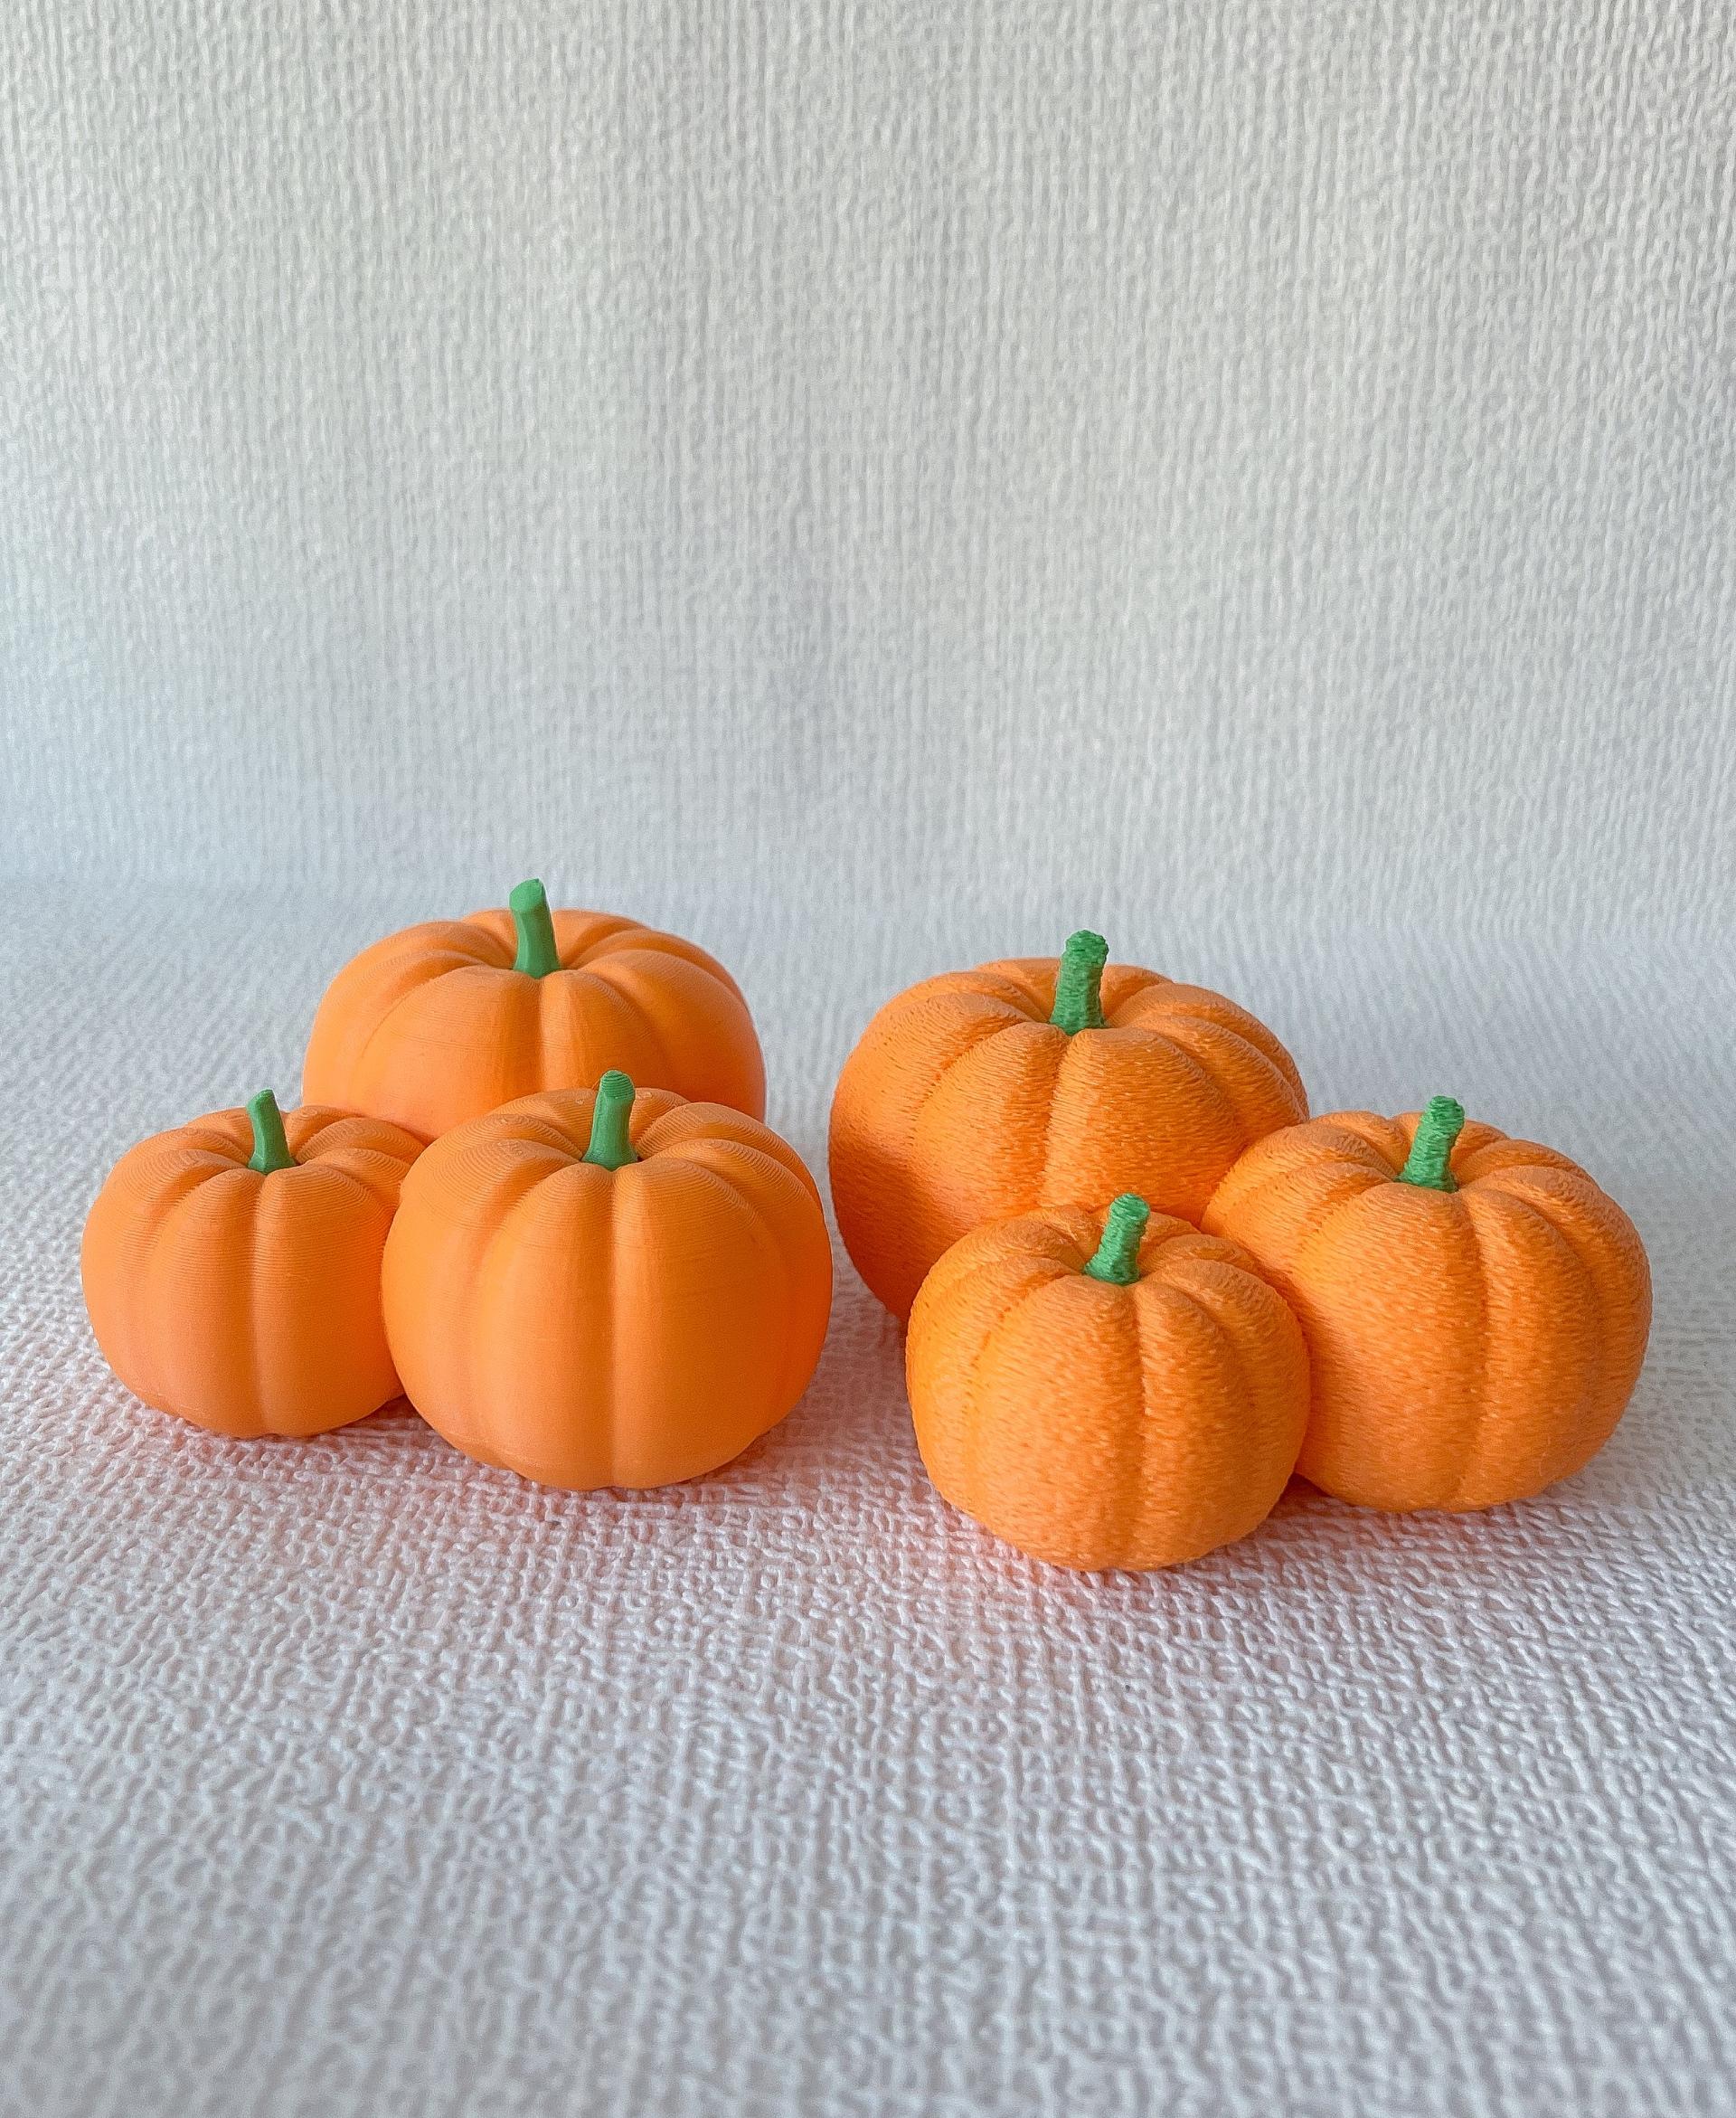 Group of Pumpkins - Left printed normal, right printed in FUZZY skin.
Polymaker filament. - 3d model